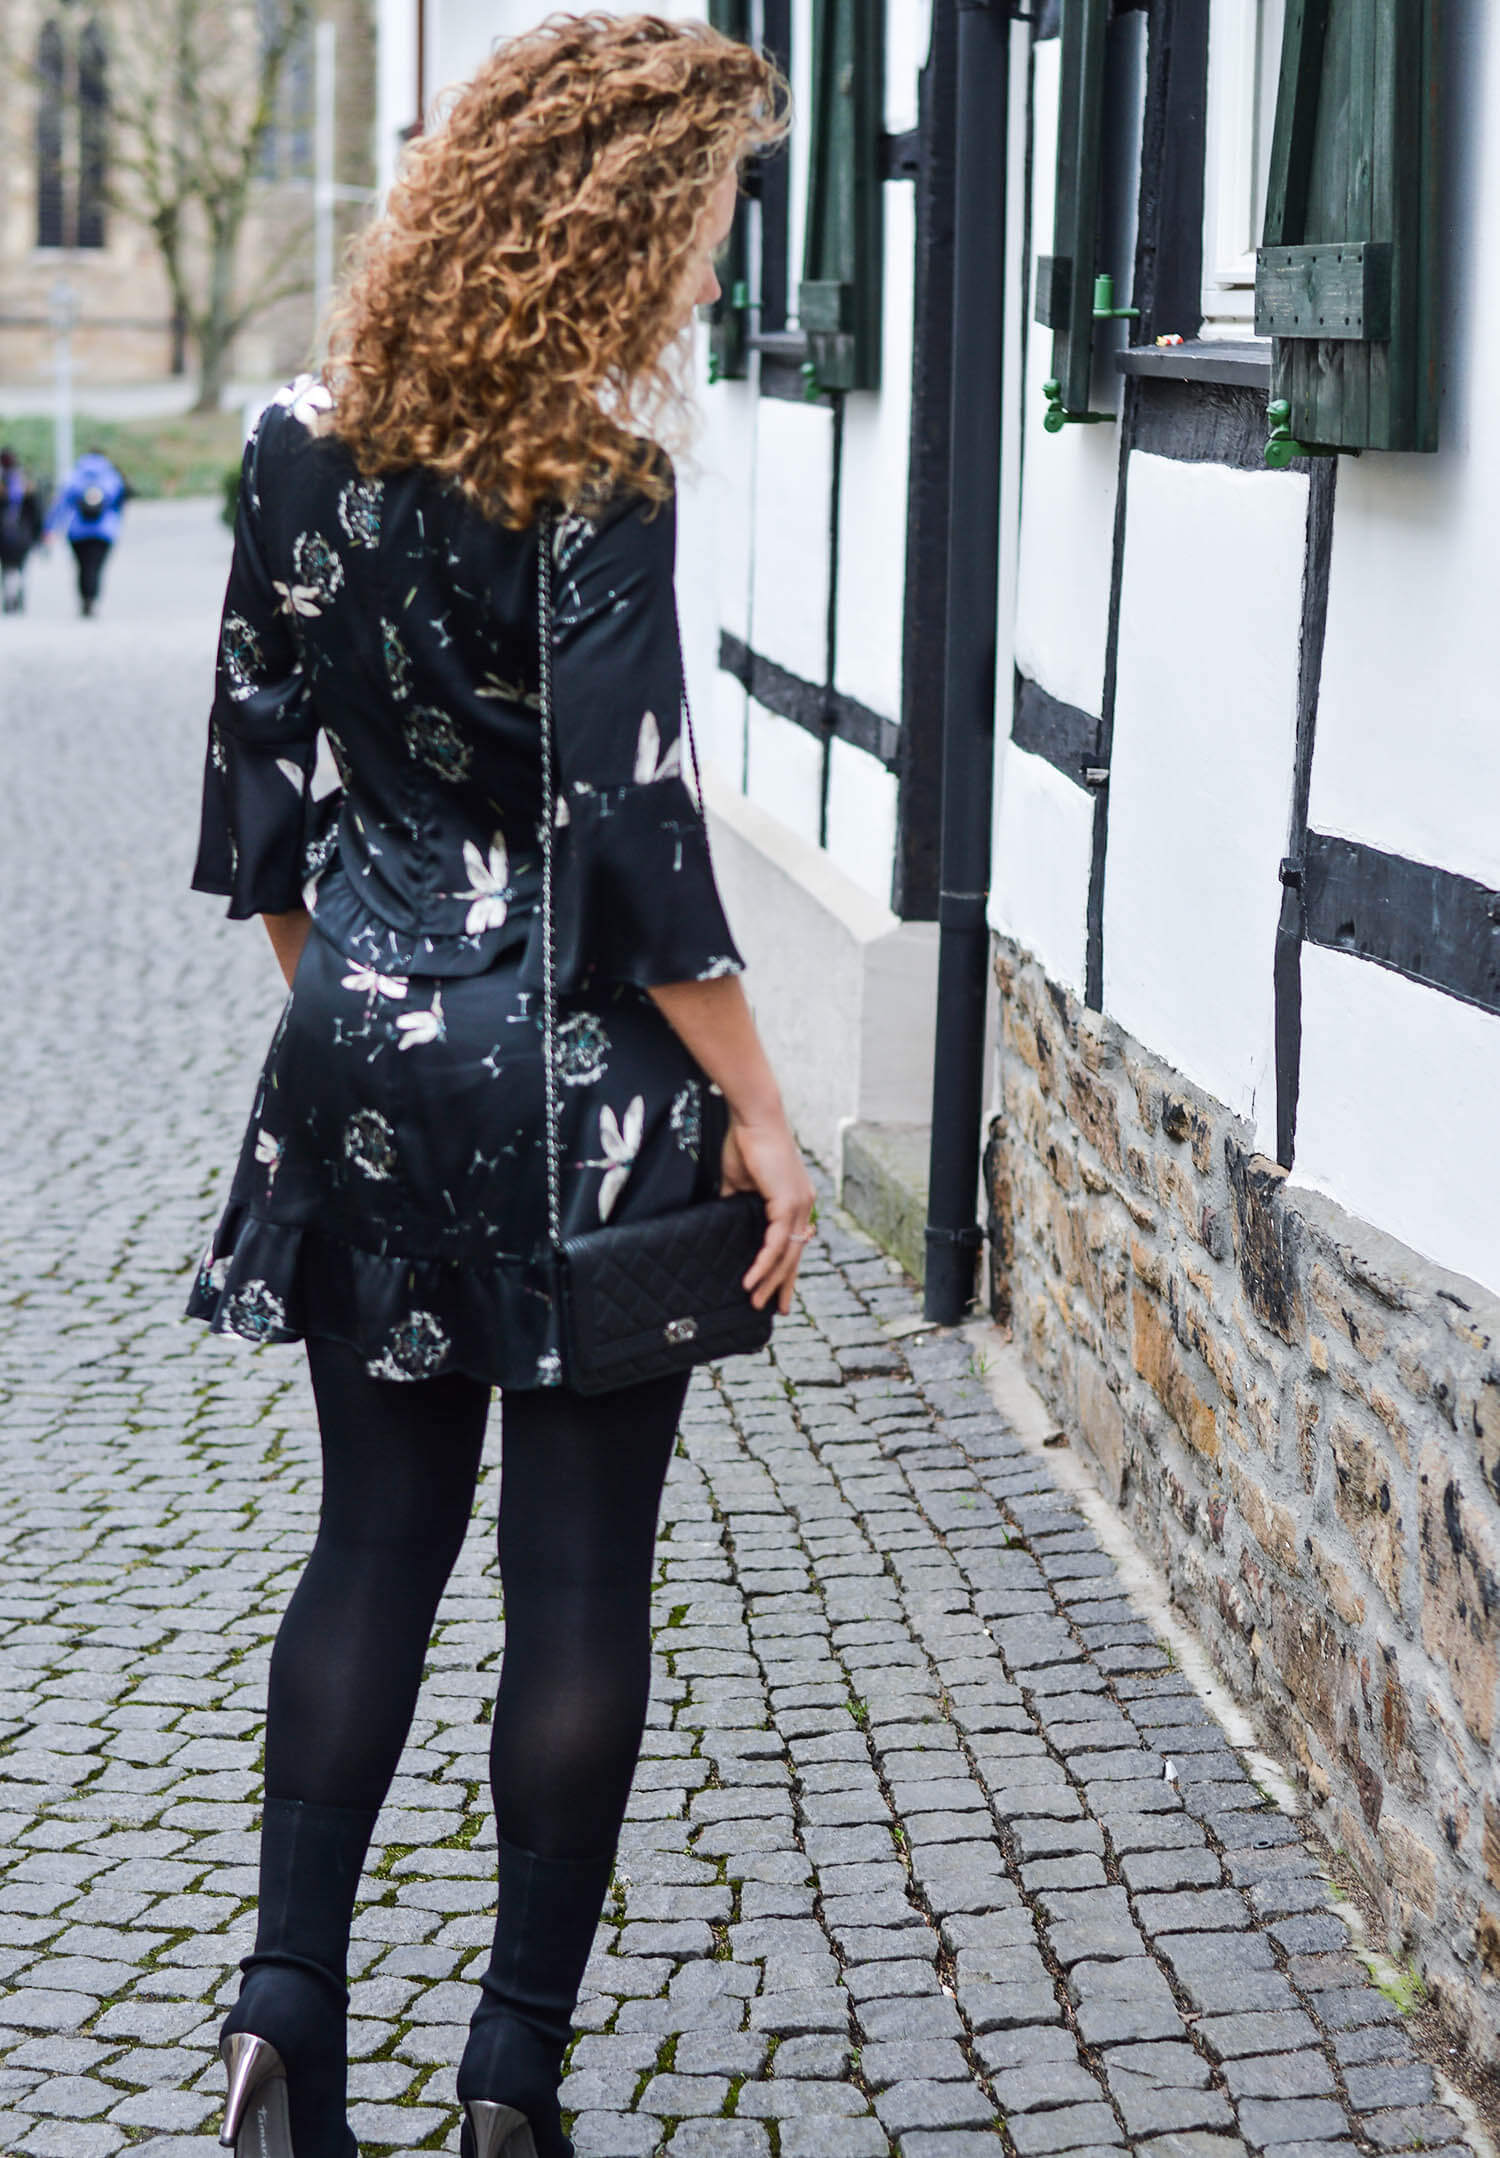 Kationette-fashionblogger-nrw-Outfit-My-New-Year's-Eve-Style-with-new-Zara-Sale-Dress-Sockboots-and-Chanel